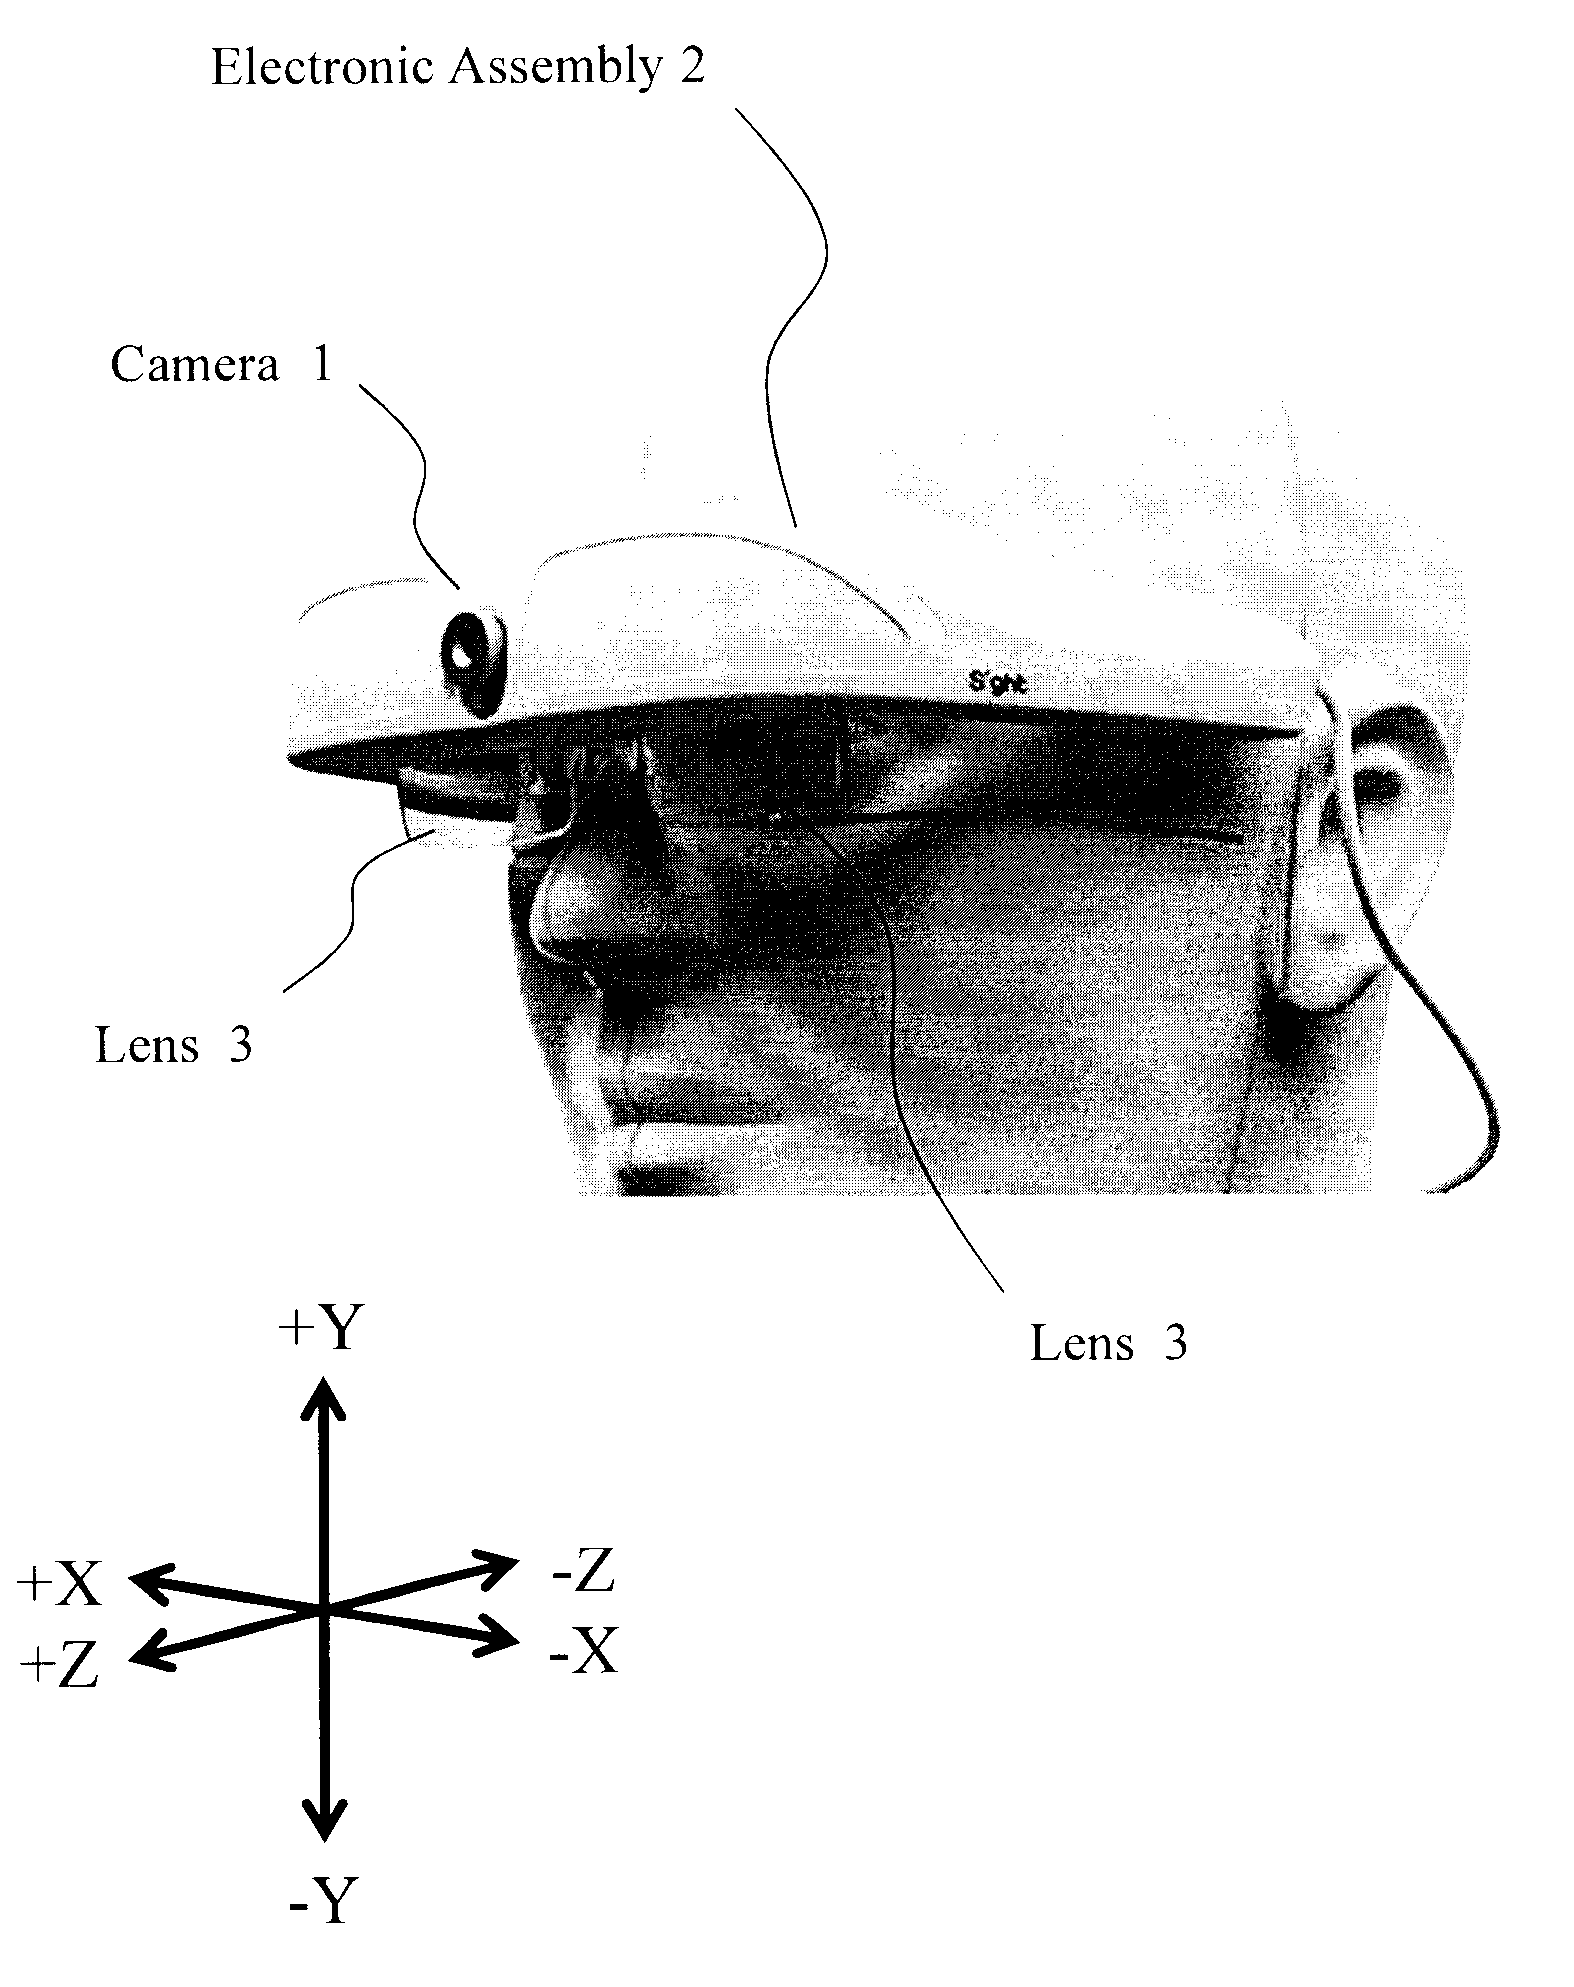 Apparatus and method for fitting head mounted vision augmentation systems